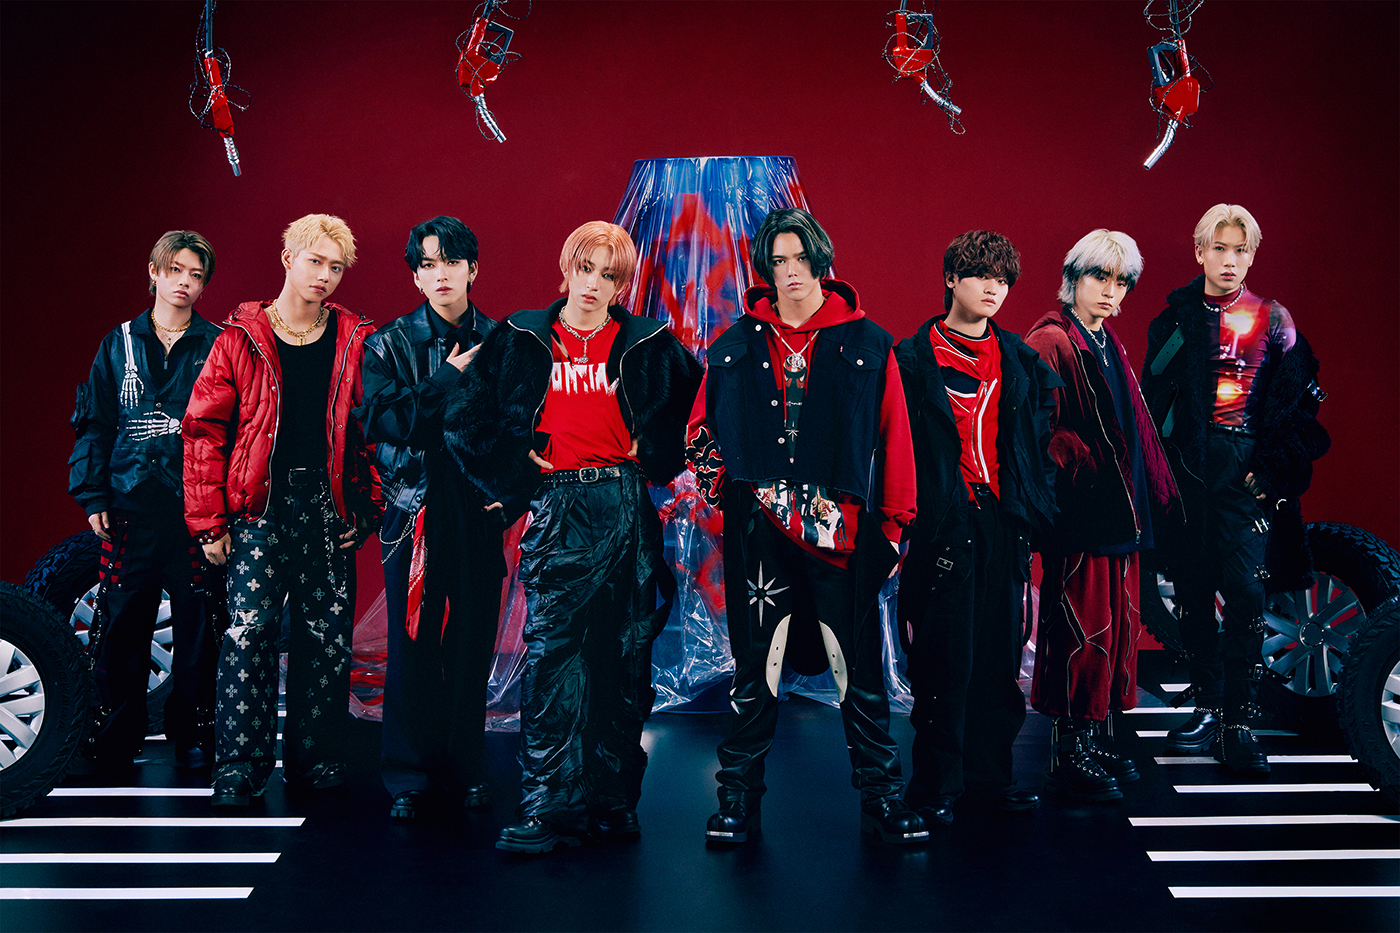 MAZZEL初全国ツアー『Join us in the PARADE』開催決定！ 全国8都市全9公演 - 画像一覧（2/2）